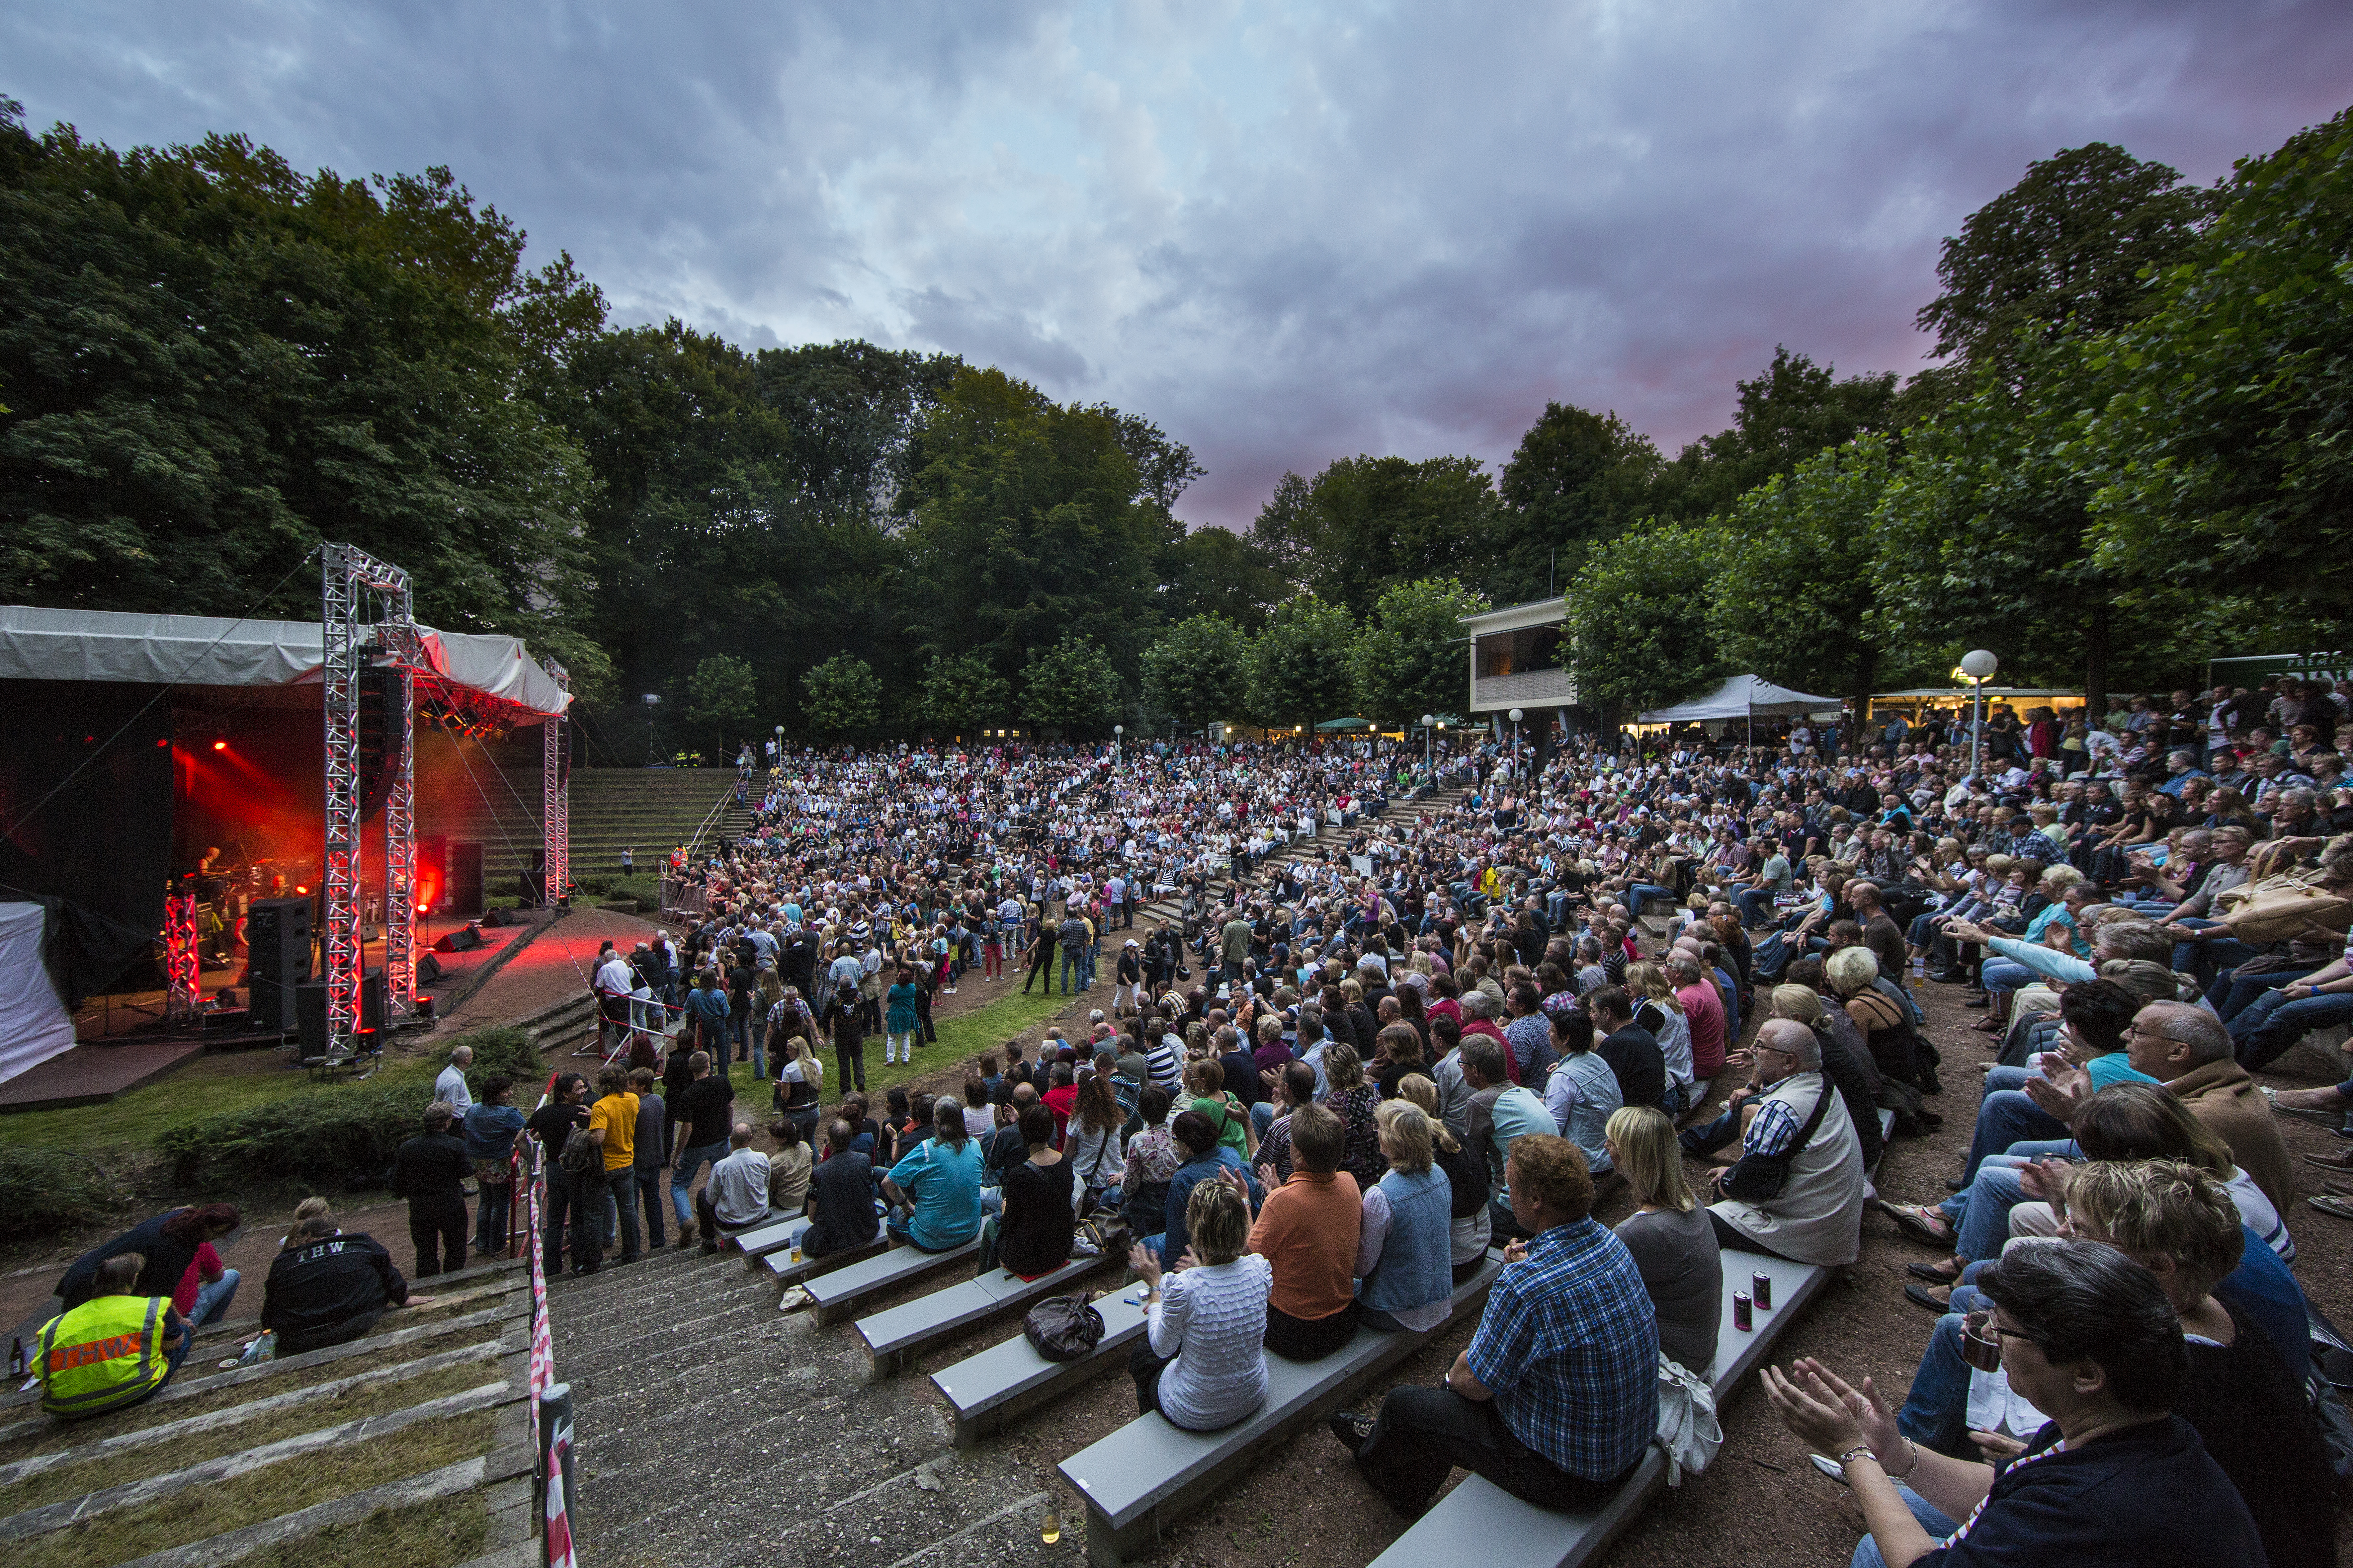 Concert situation at the Freilichtbühne Wattenscheid with a full audience.